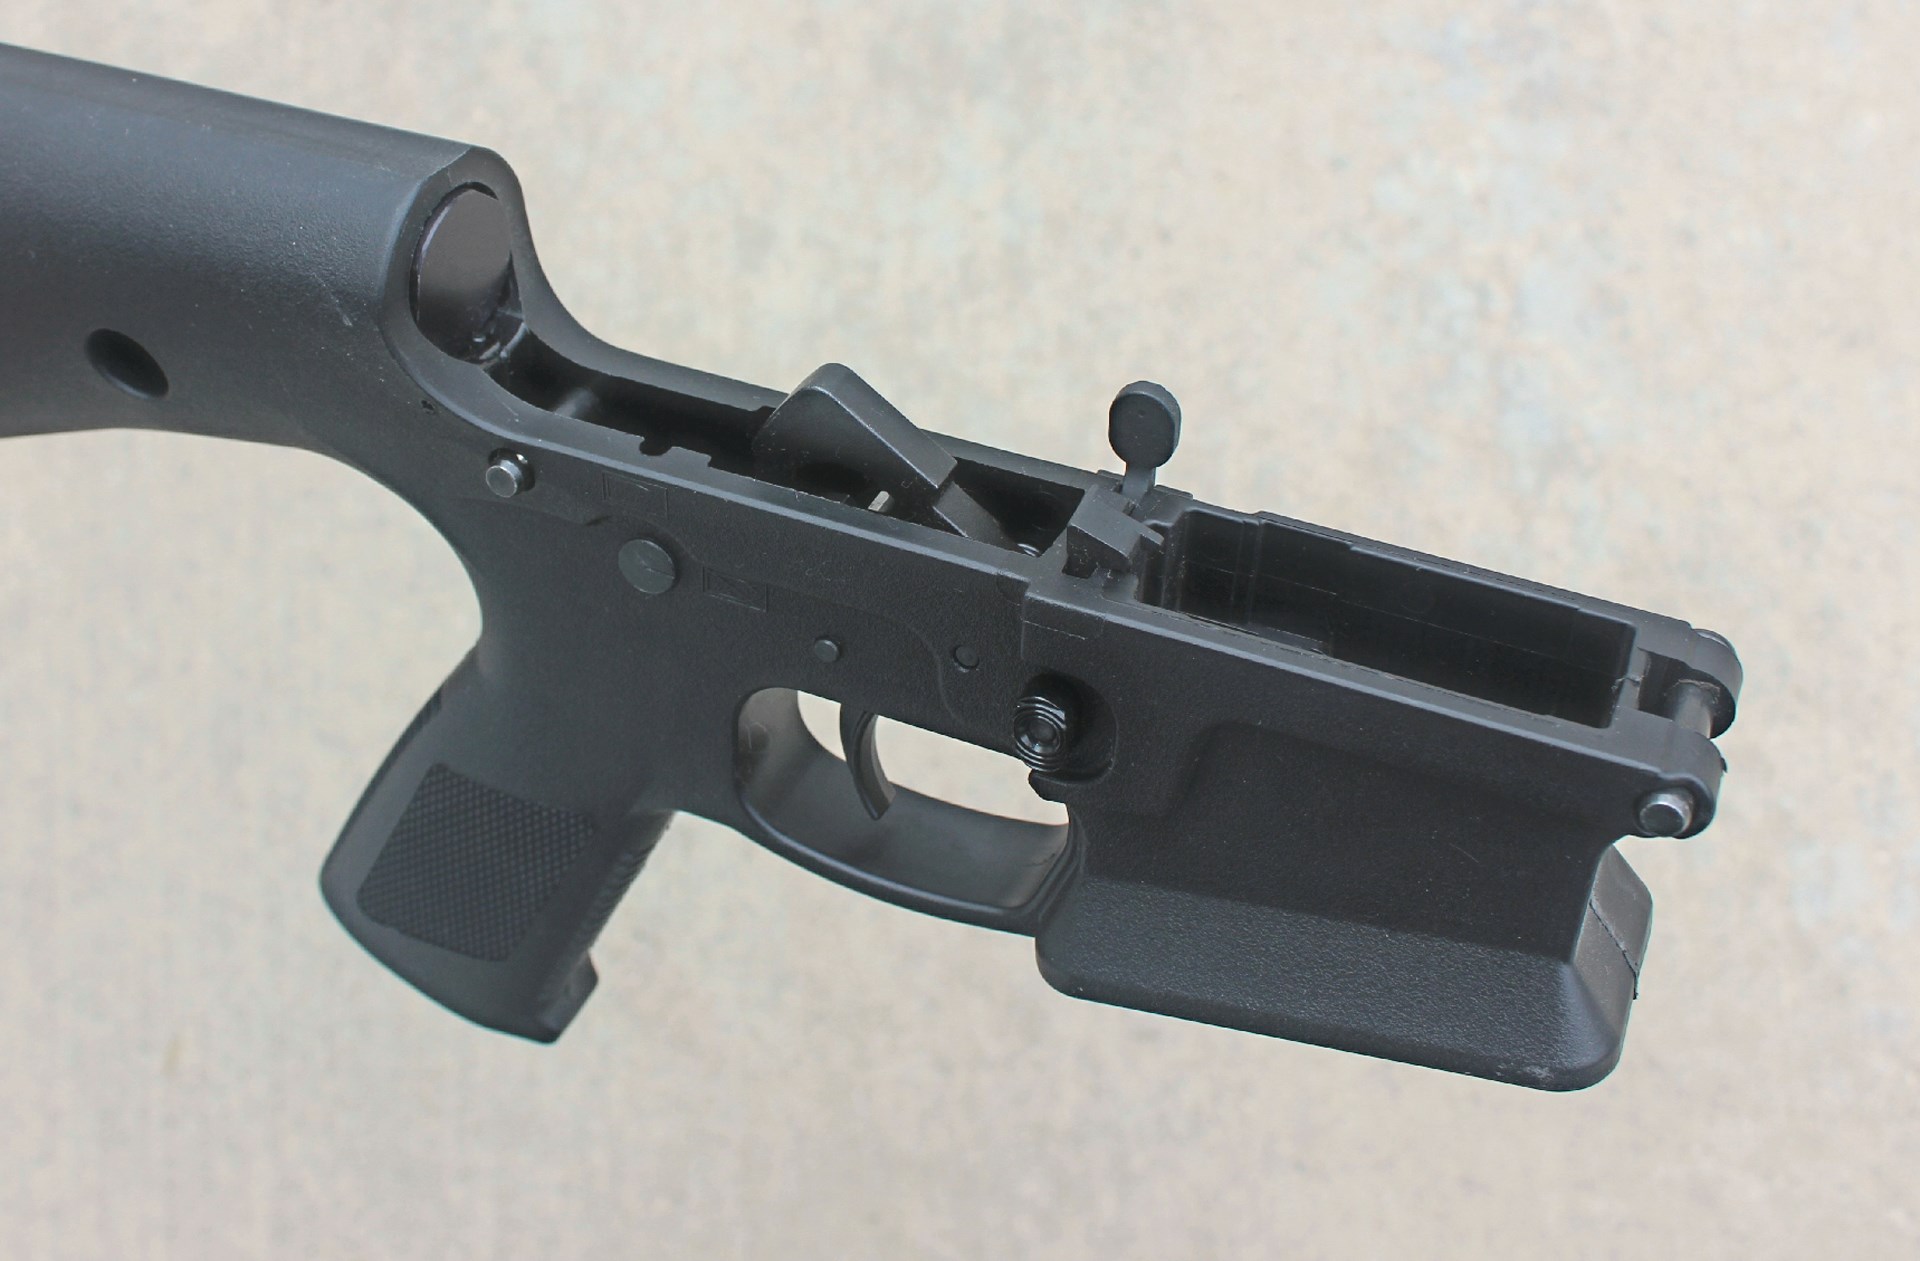 KP-15 with mil-spec components trigger bolt catch magazine release